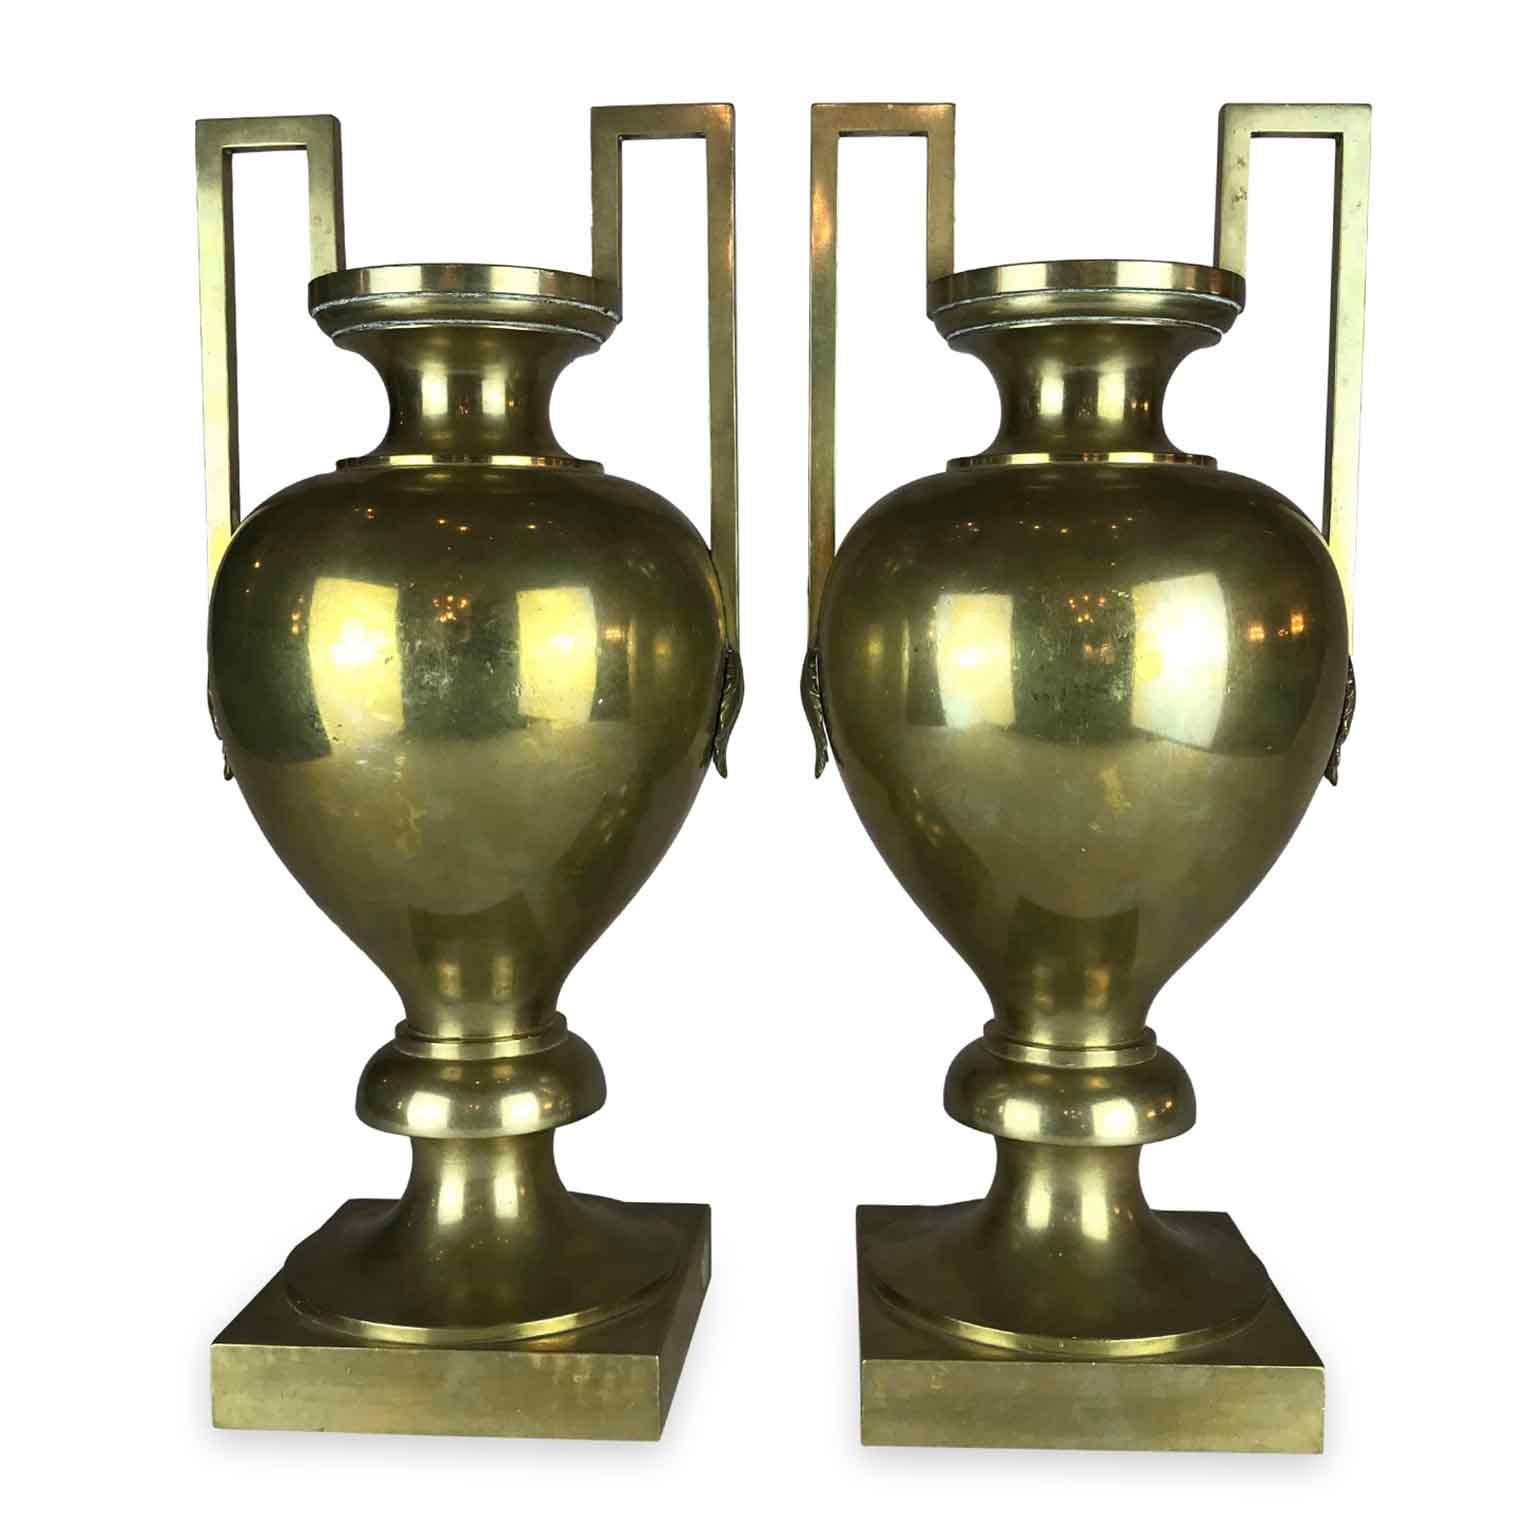 Pair of Large Italian Table Lamps 19th Century Empire Neoclassical Bronze Urns  4